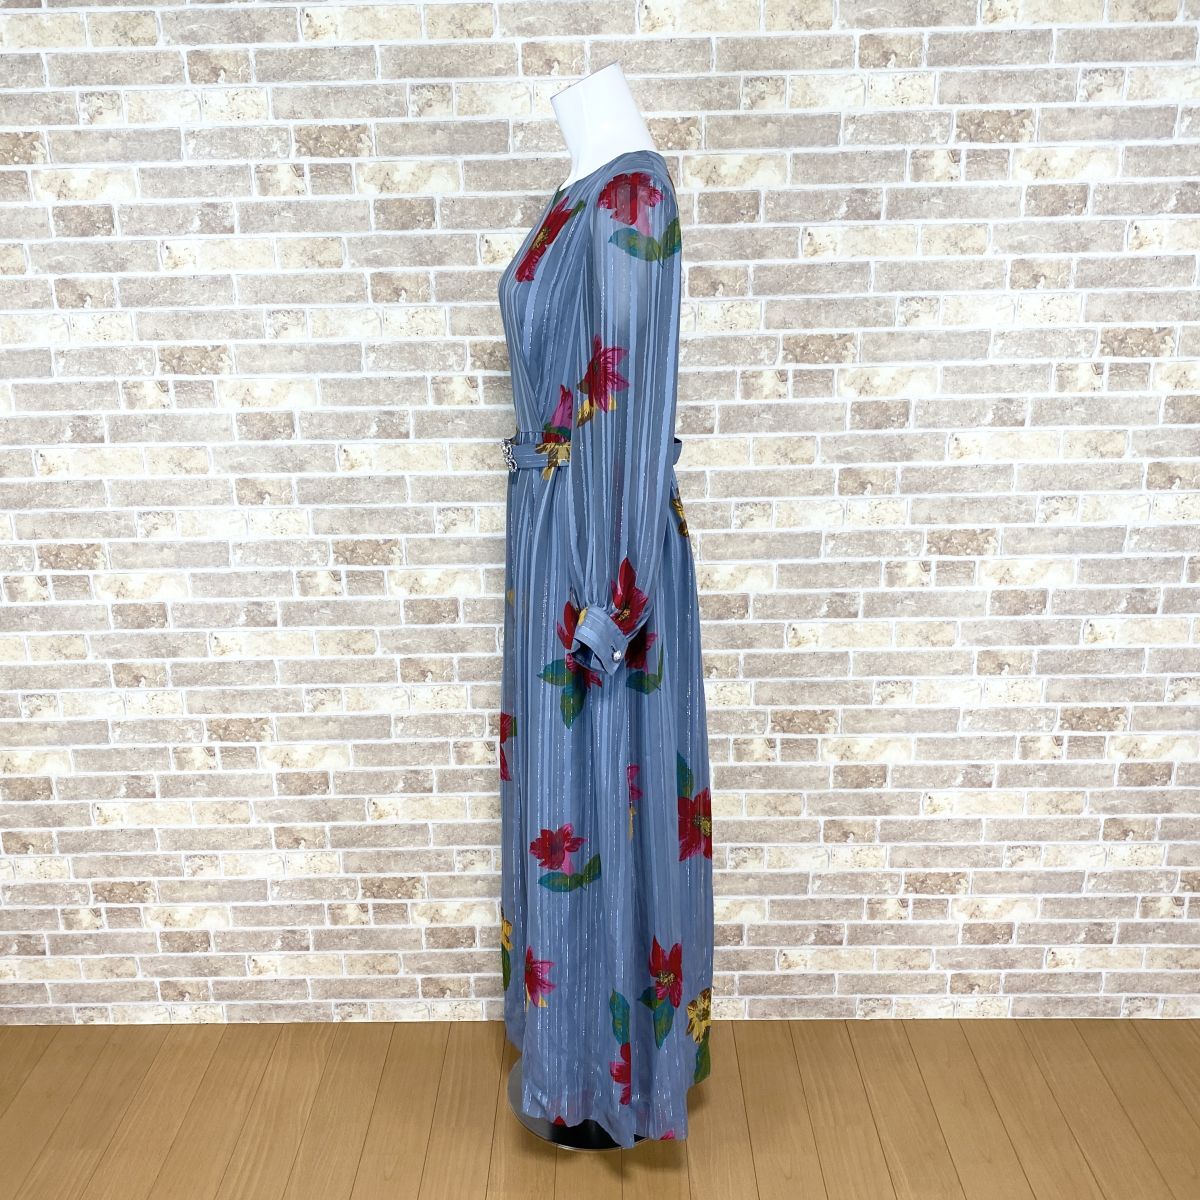 1 jpy dress Mai pcs costume long dress blue gray pattern shoulder pad . product? party dress color dress Event used 4313